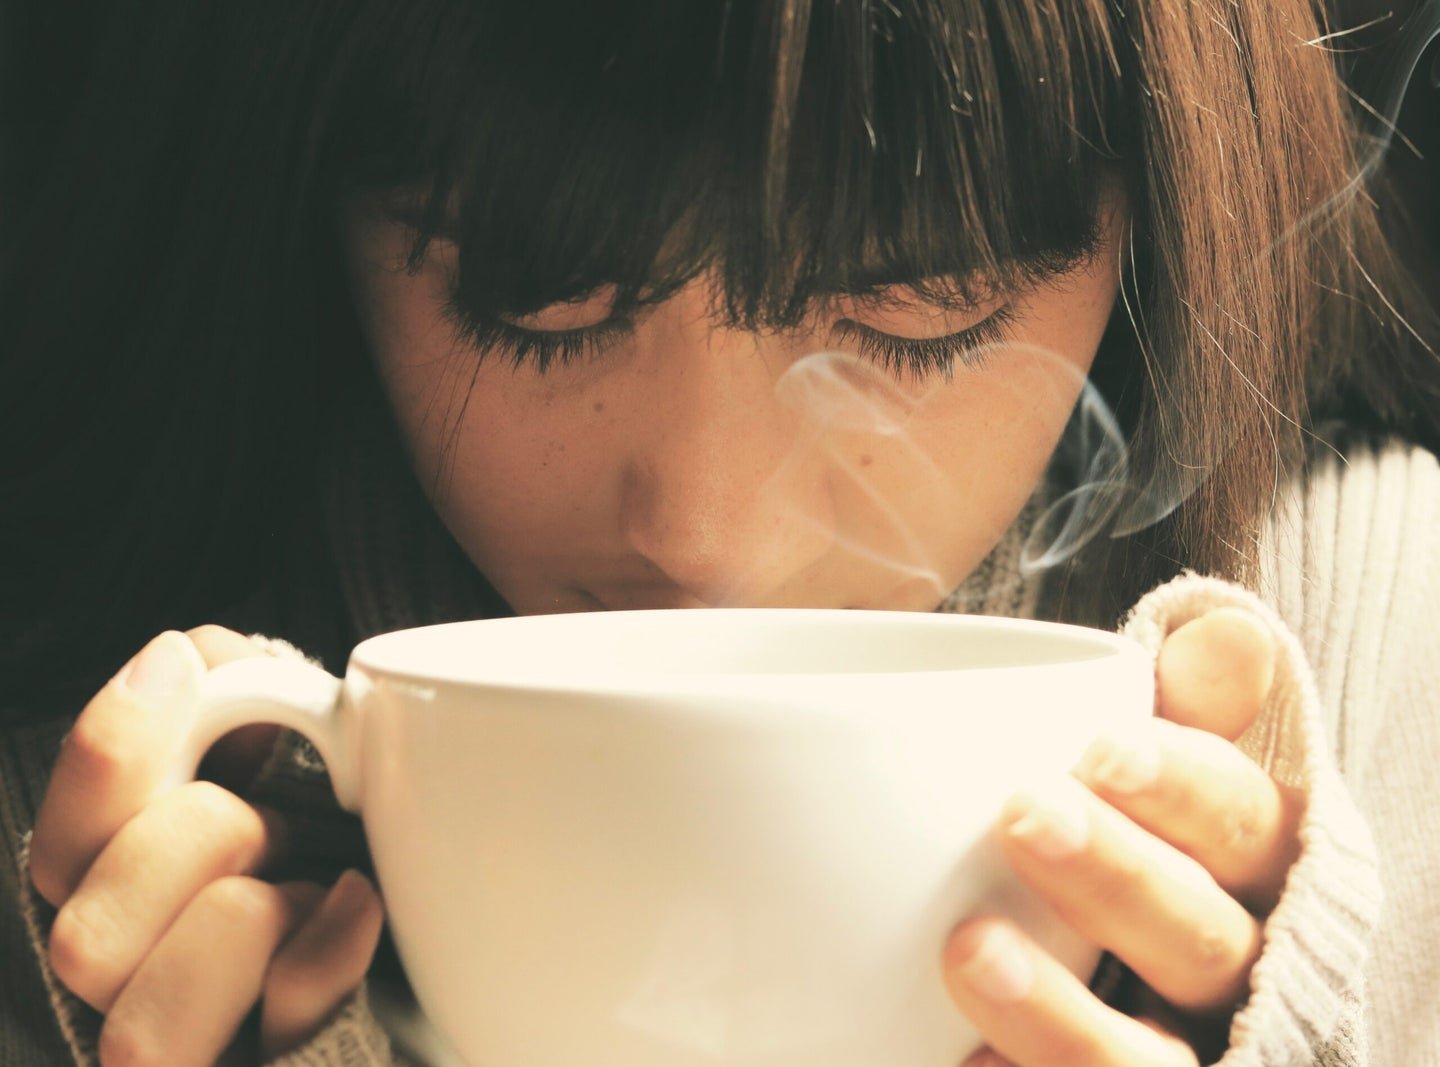 Coffee and tea could lower your risk of two devastating health issues